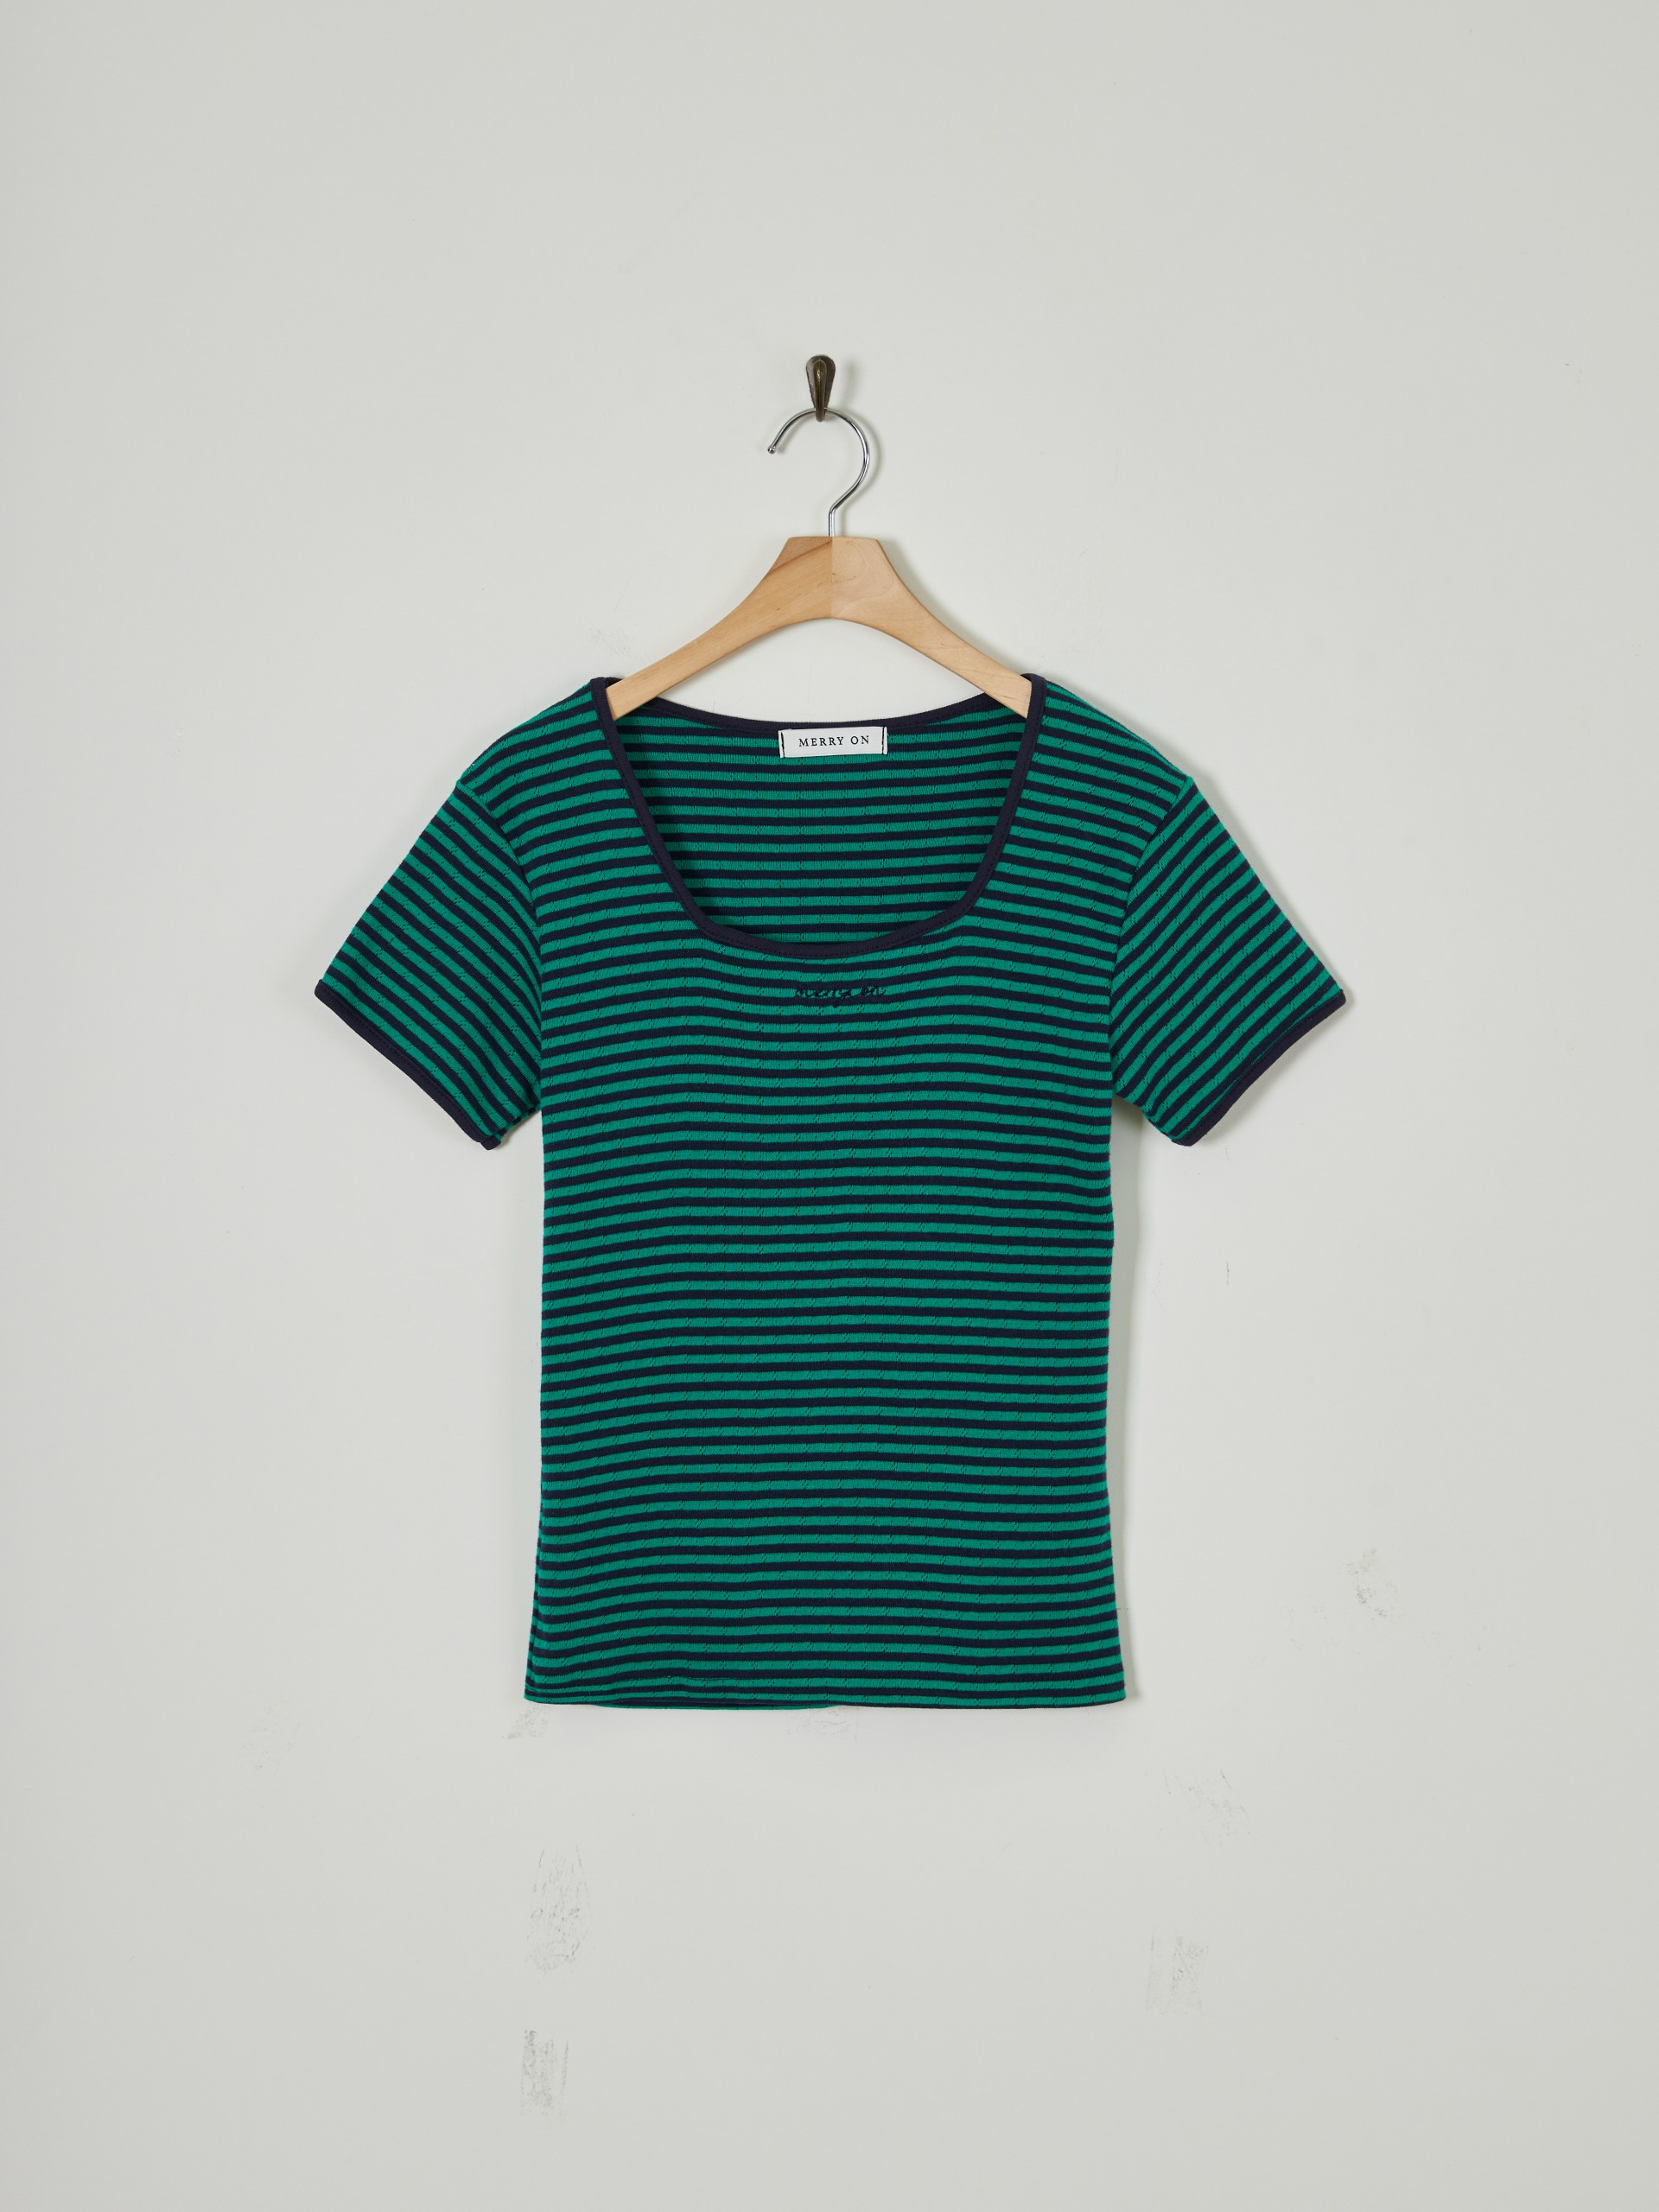 Peter Stripe T-shirt [GREEN] [Departure today]